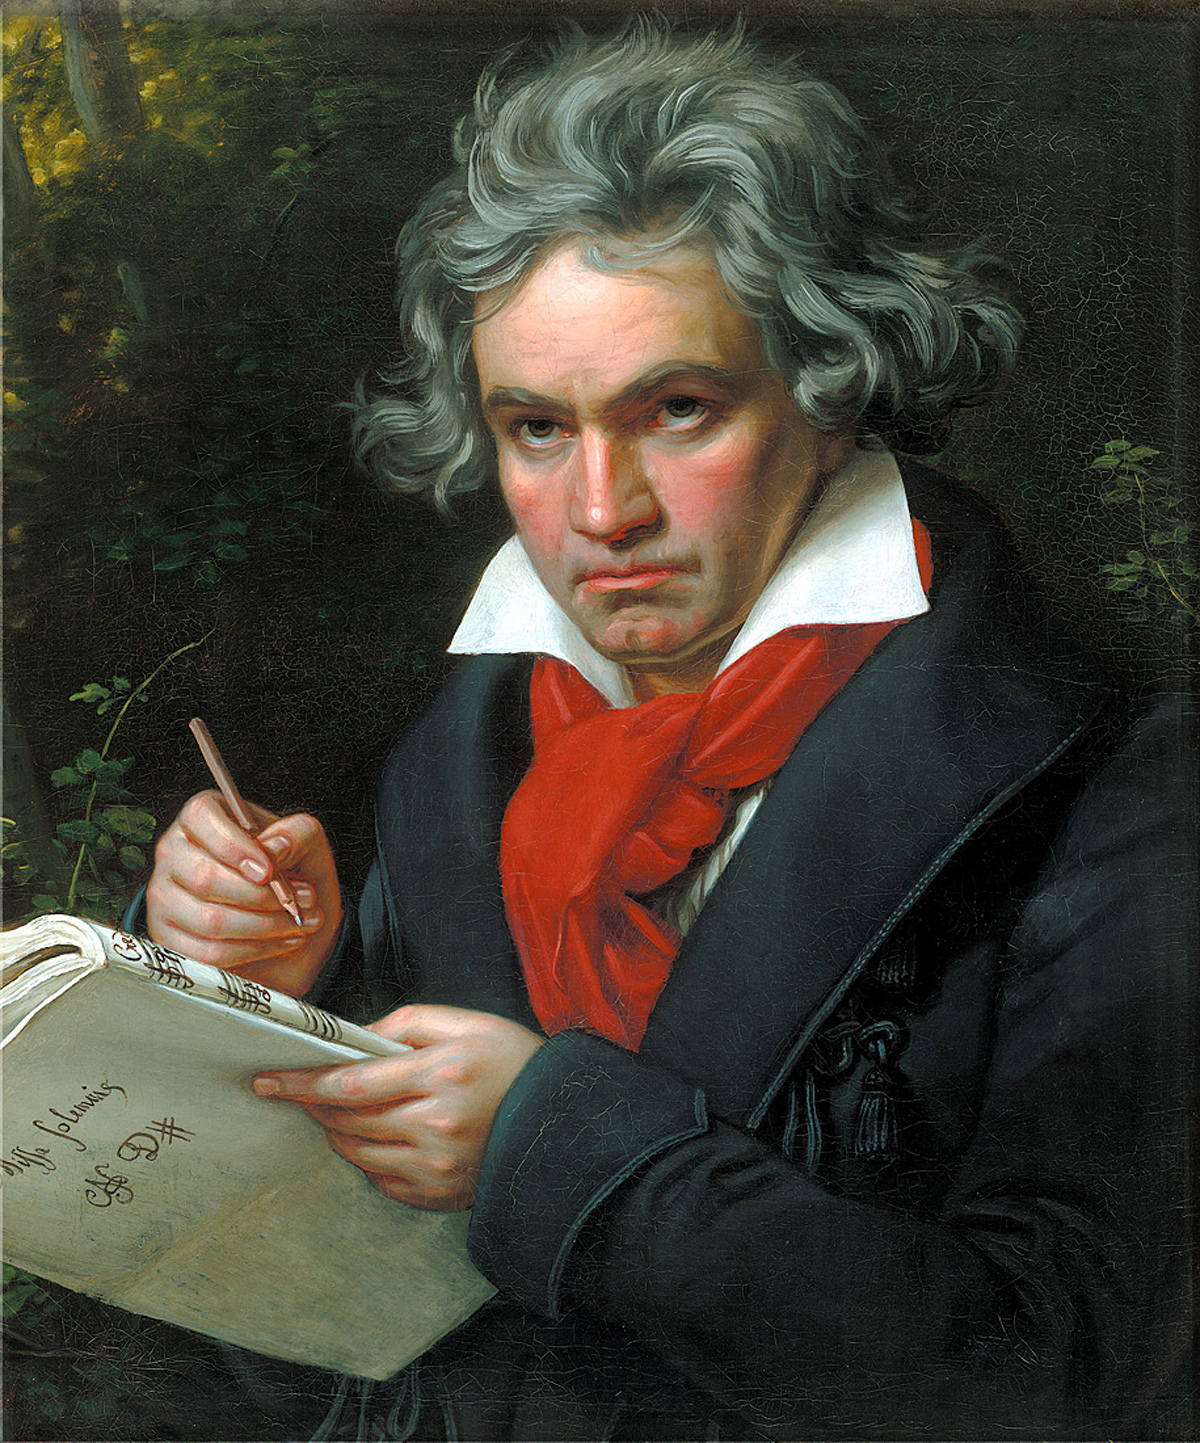 Oil painting portrait of Beethoven, he holds a pen over pages of music and wears a bright red cravat. 